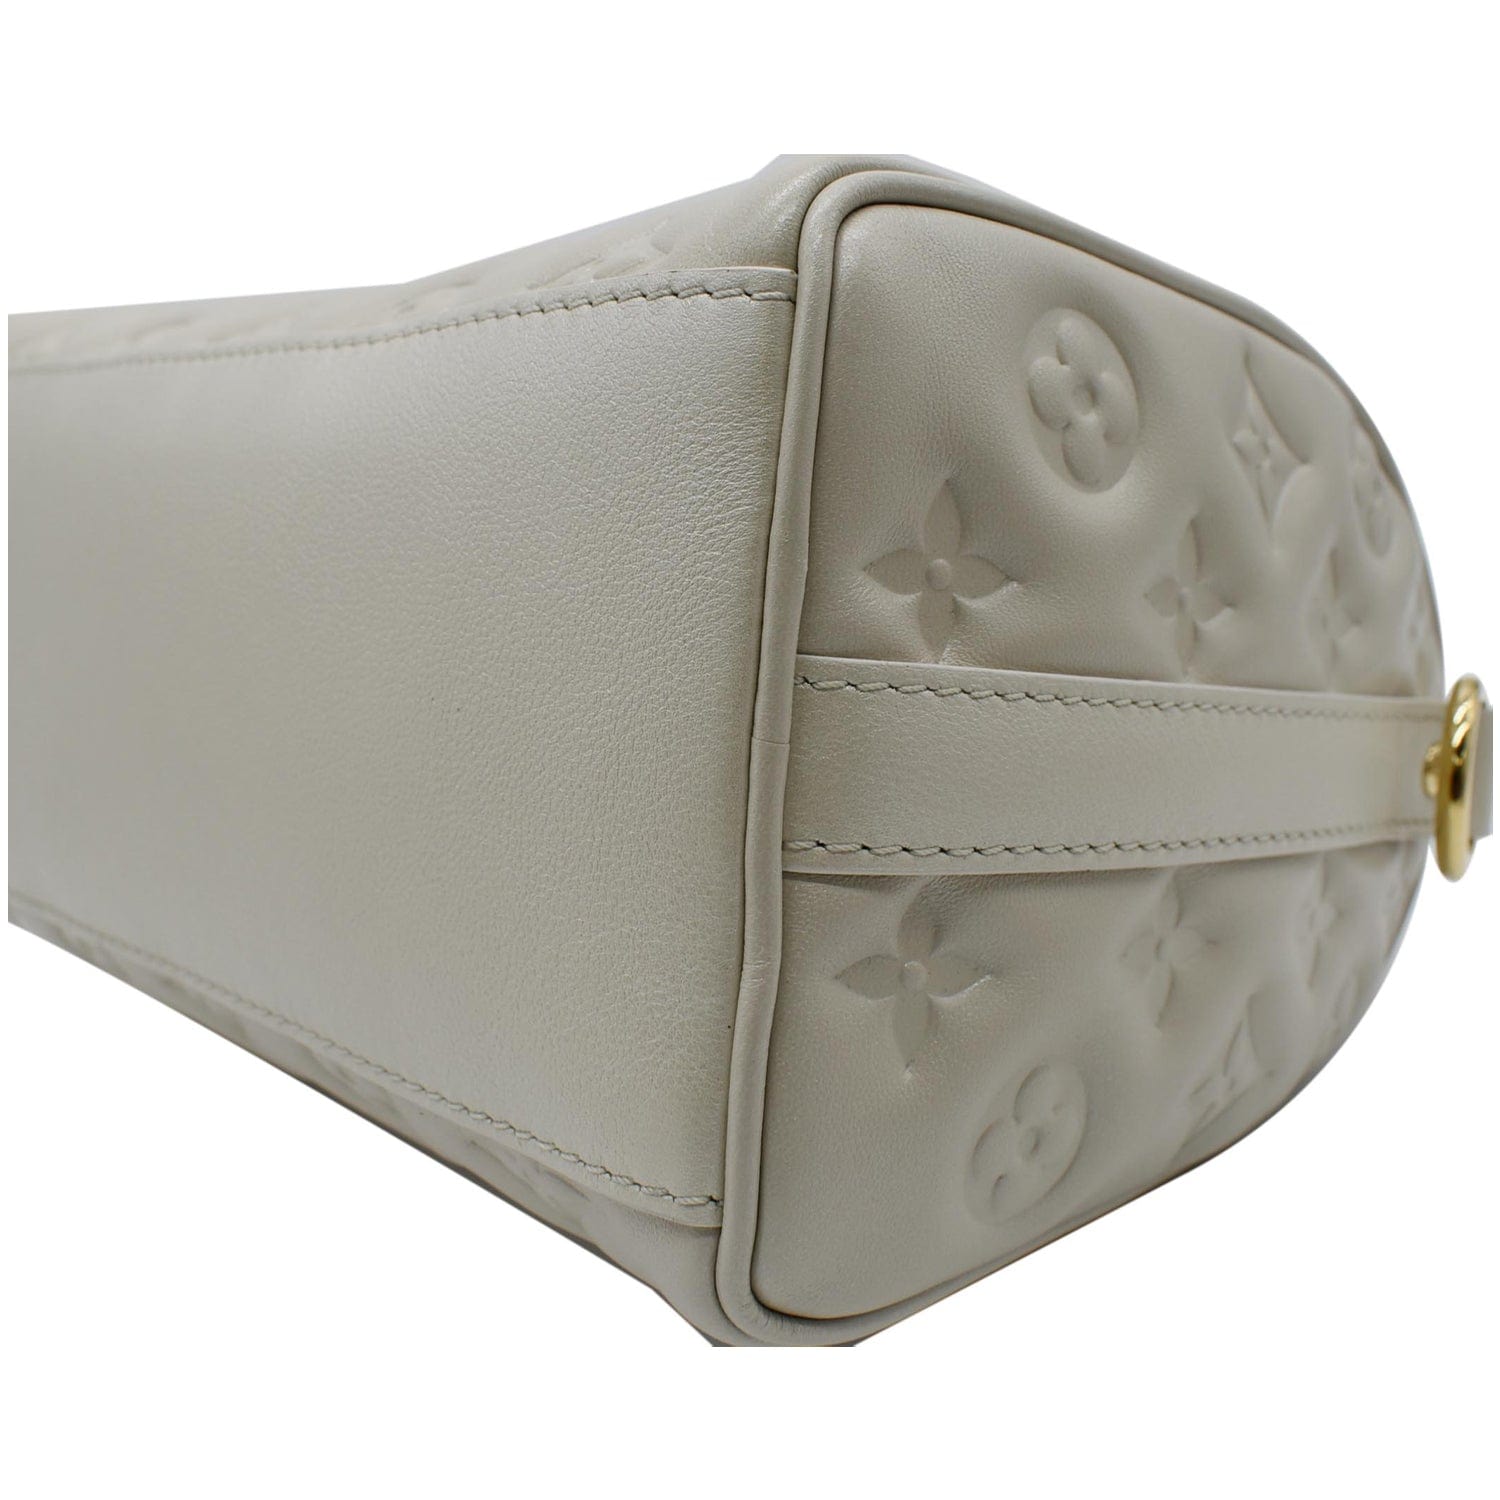 Louis Vuitton Ivory marabout feather Speedy bag, €5100